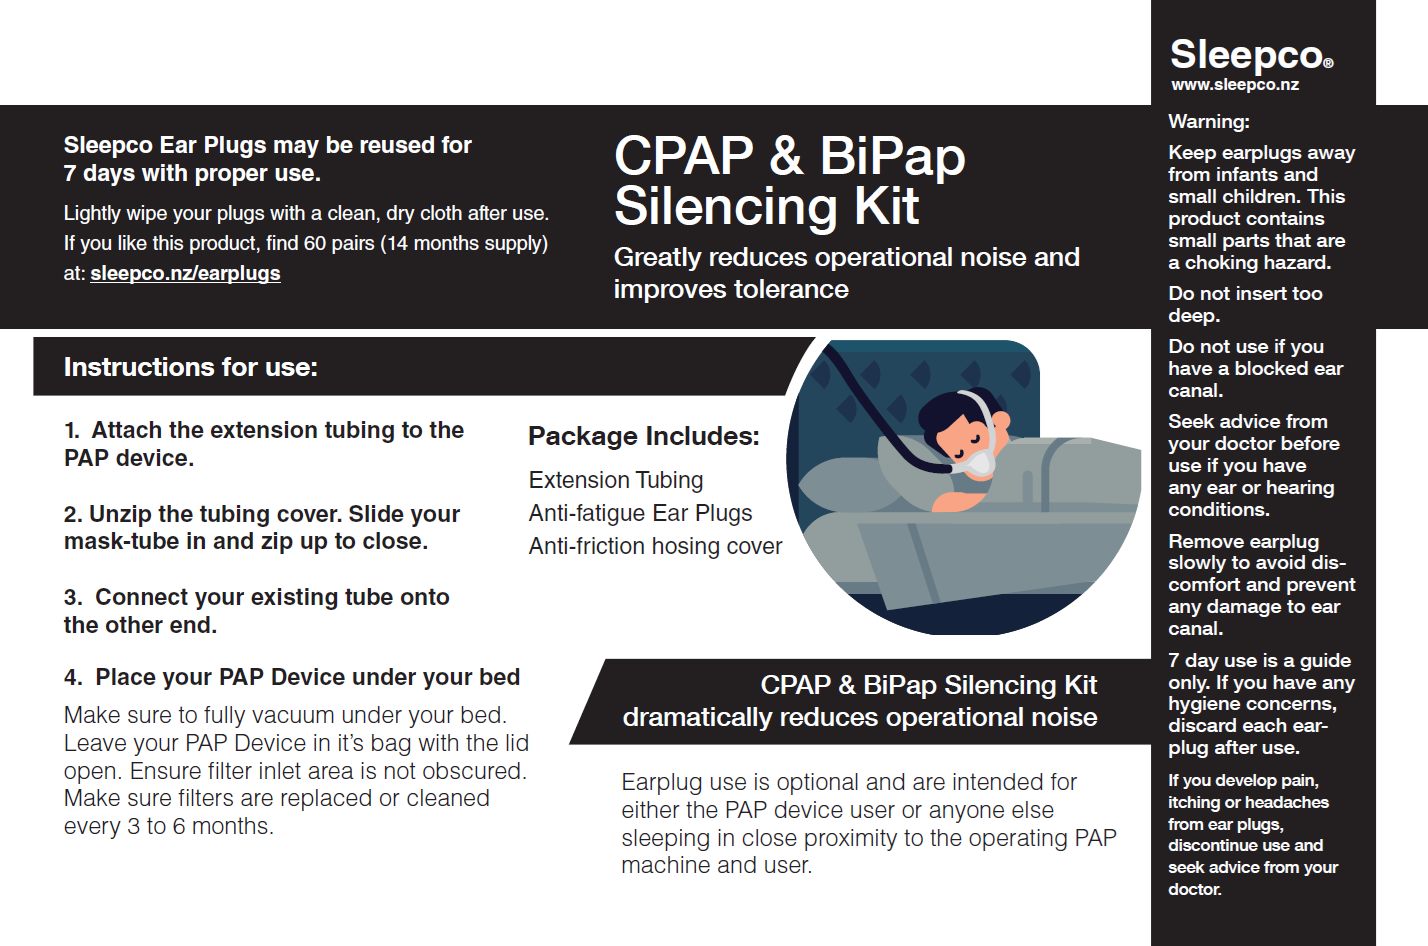 Sleepco CPAP Silencing Kit. Reduce CPAP operation noise.